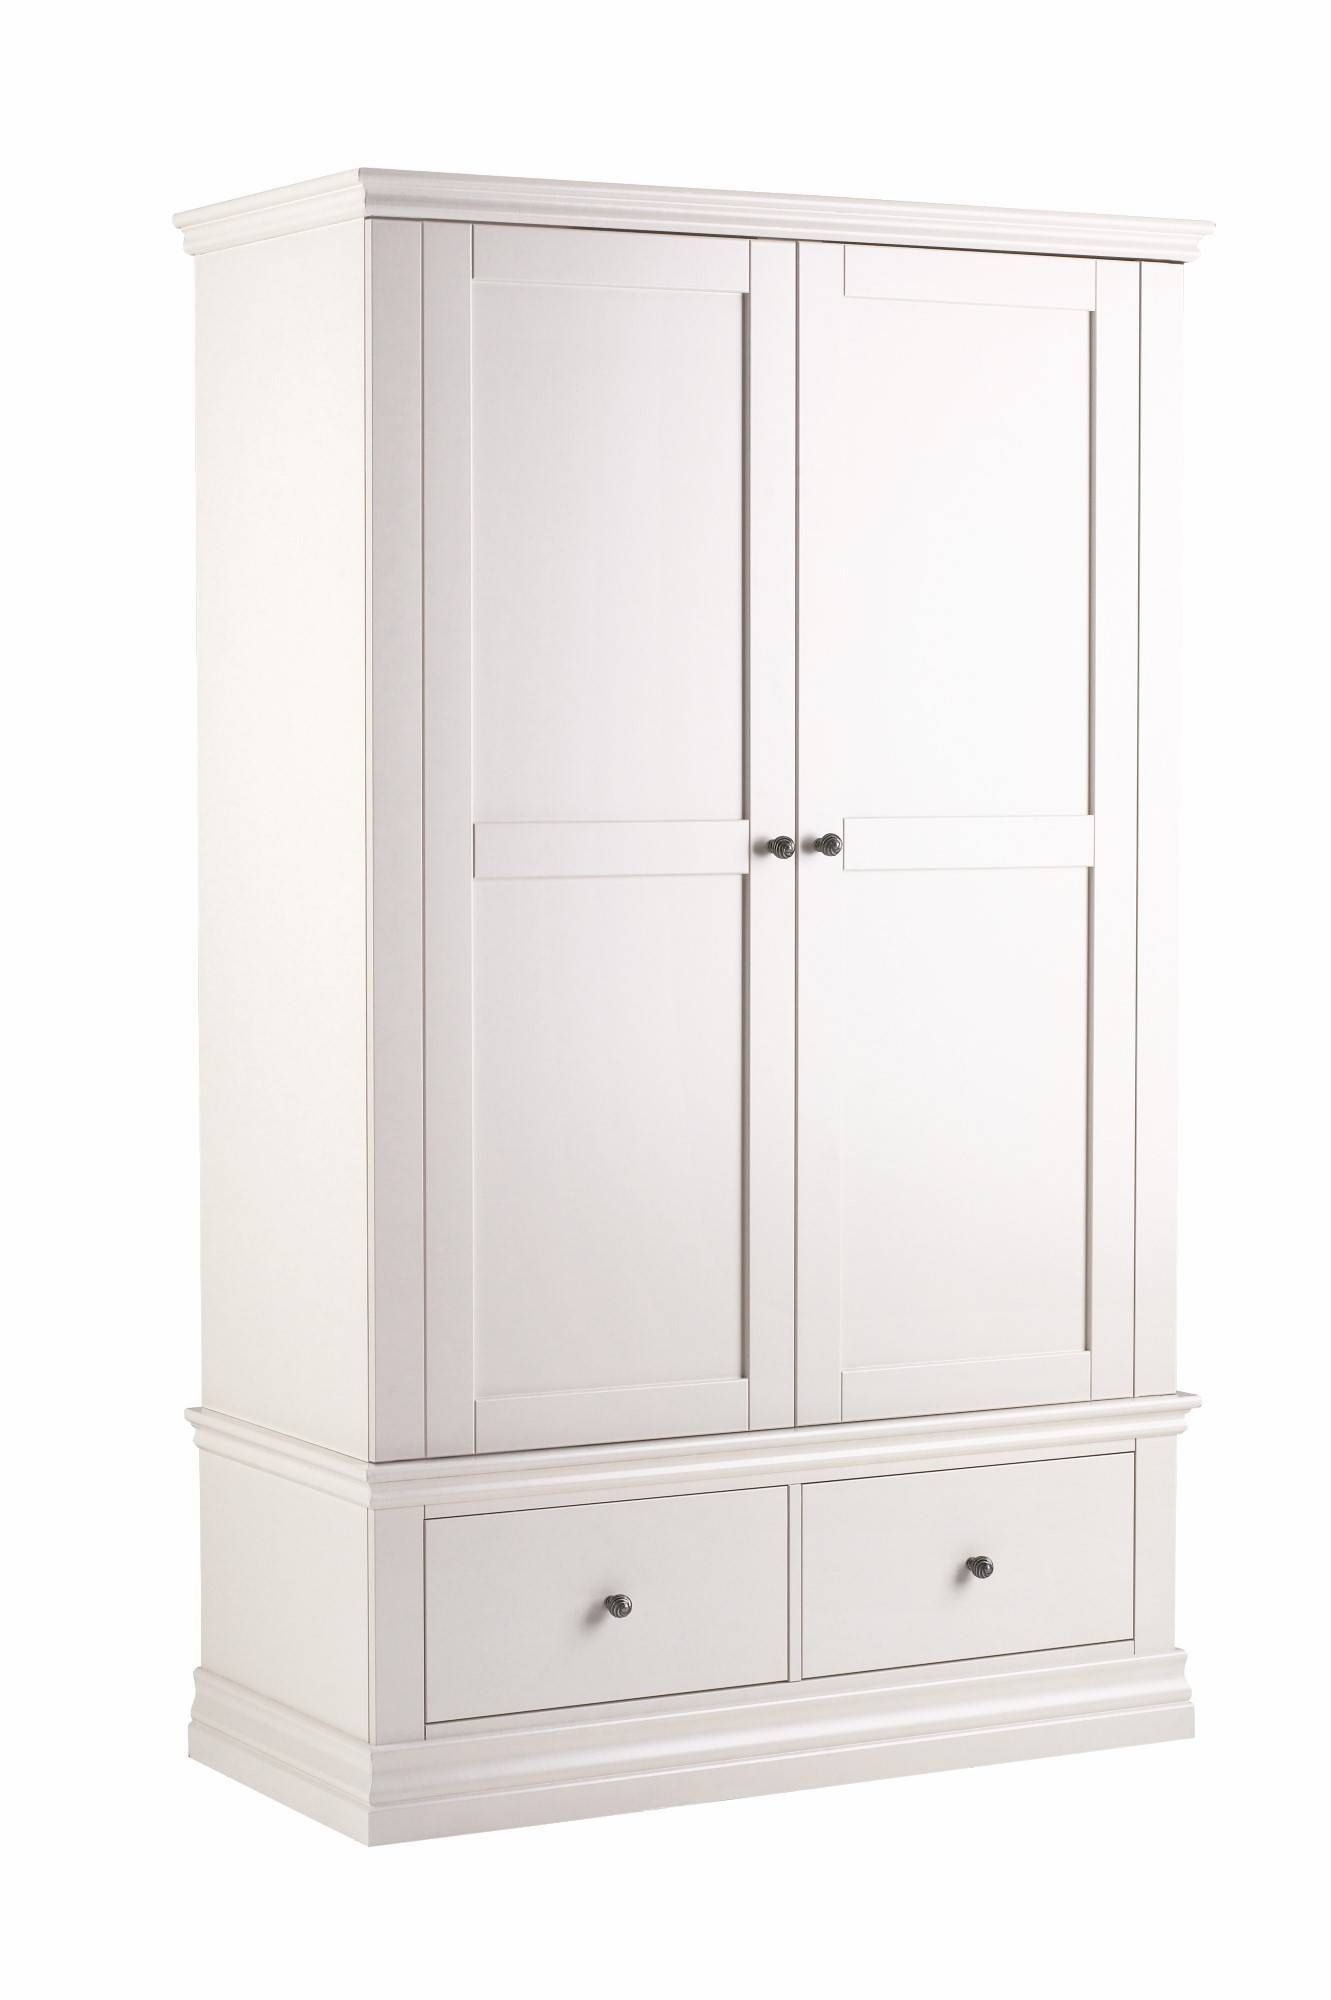 Wardrobes, Bedroom Furniture In Kent From Lukehurst Inside Large White Wardrobes With Drawers (Photo 5 of 15)